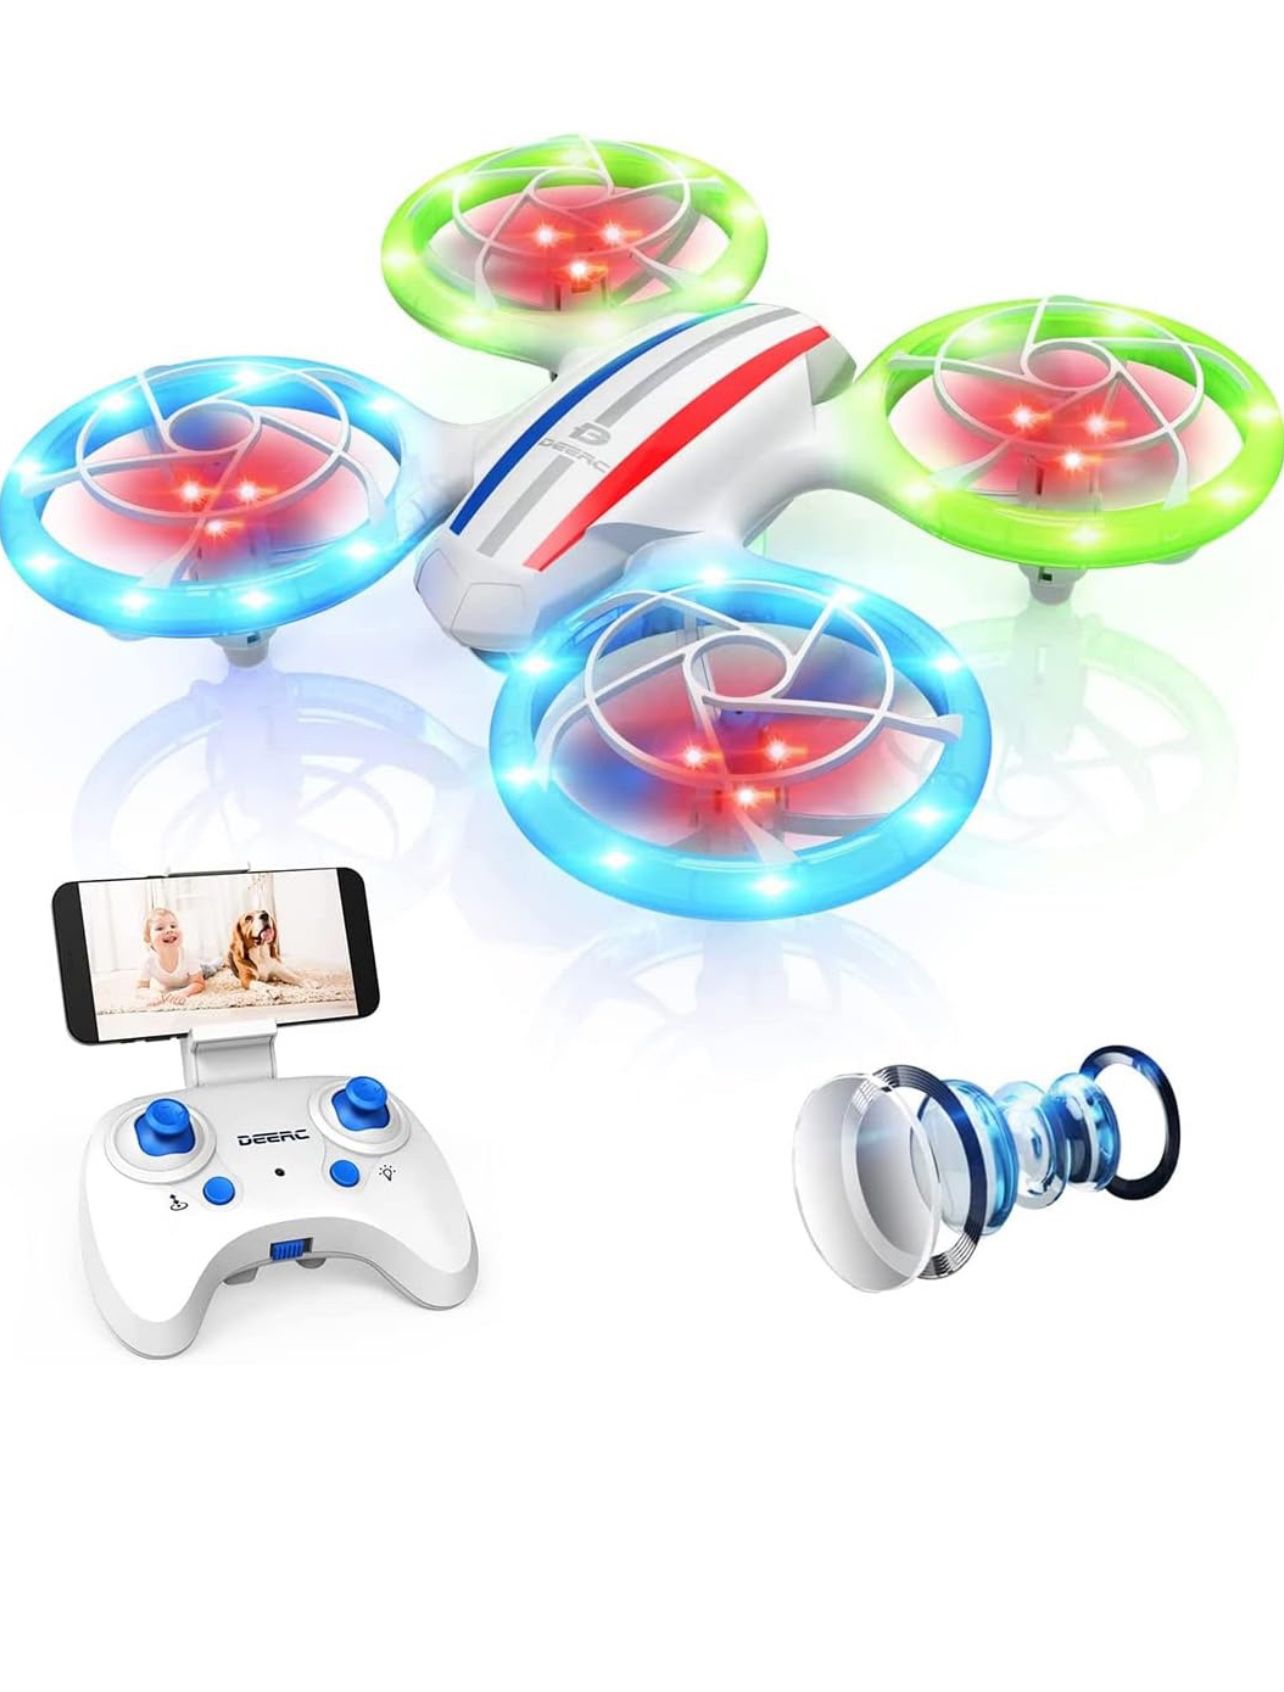 Brandnew  Drones for Kids Beginners, LED RC Mini Drone with Altitude Hold, Headless Mode, Quadcopter with 720P HD FPV WiFi Camera, Propeller Full Prot